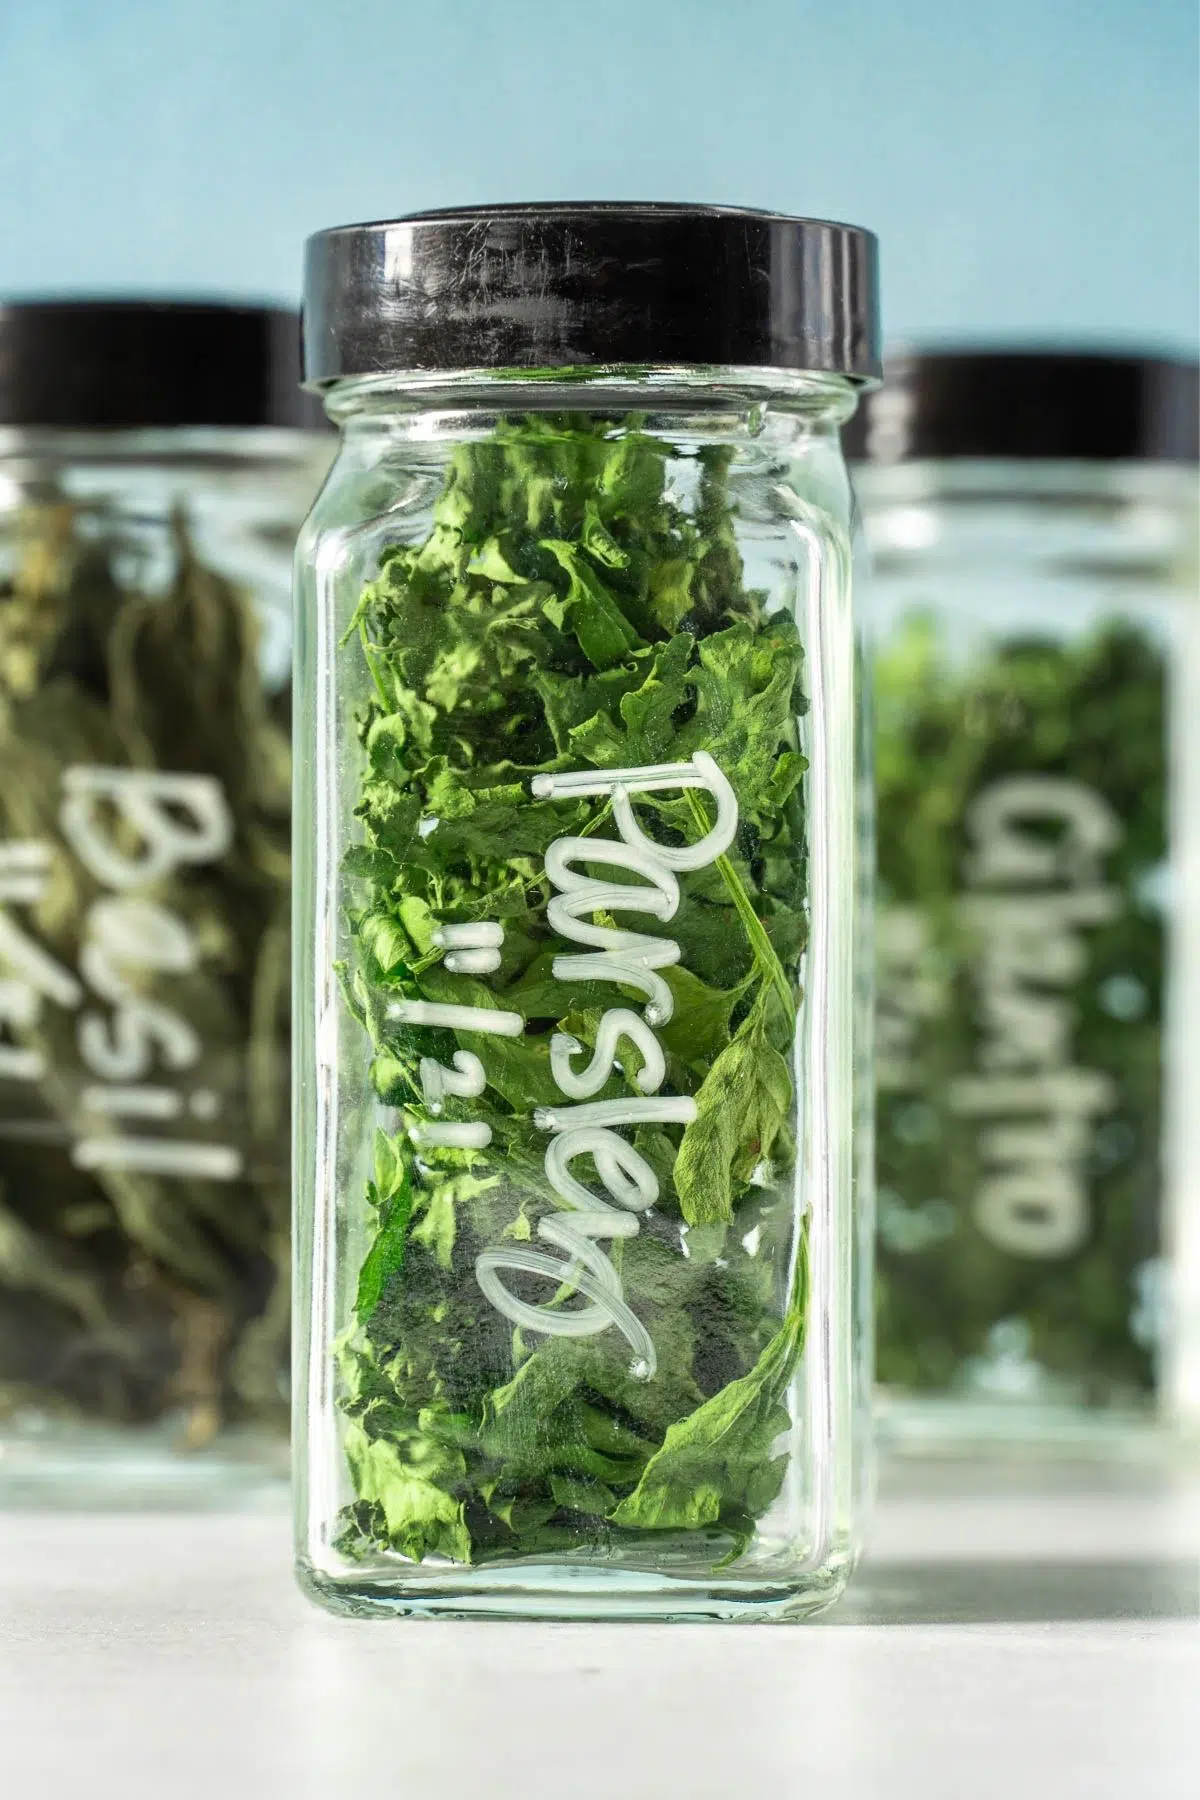 A jar labeled "Parsley: